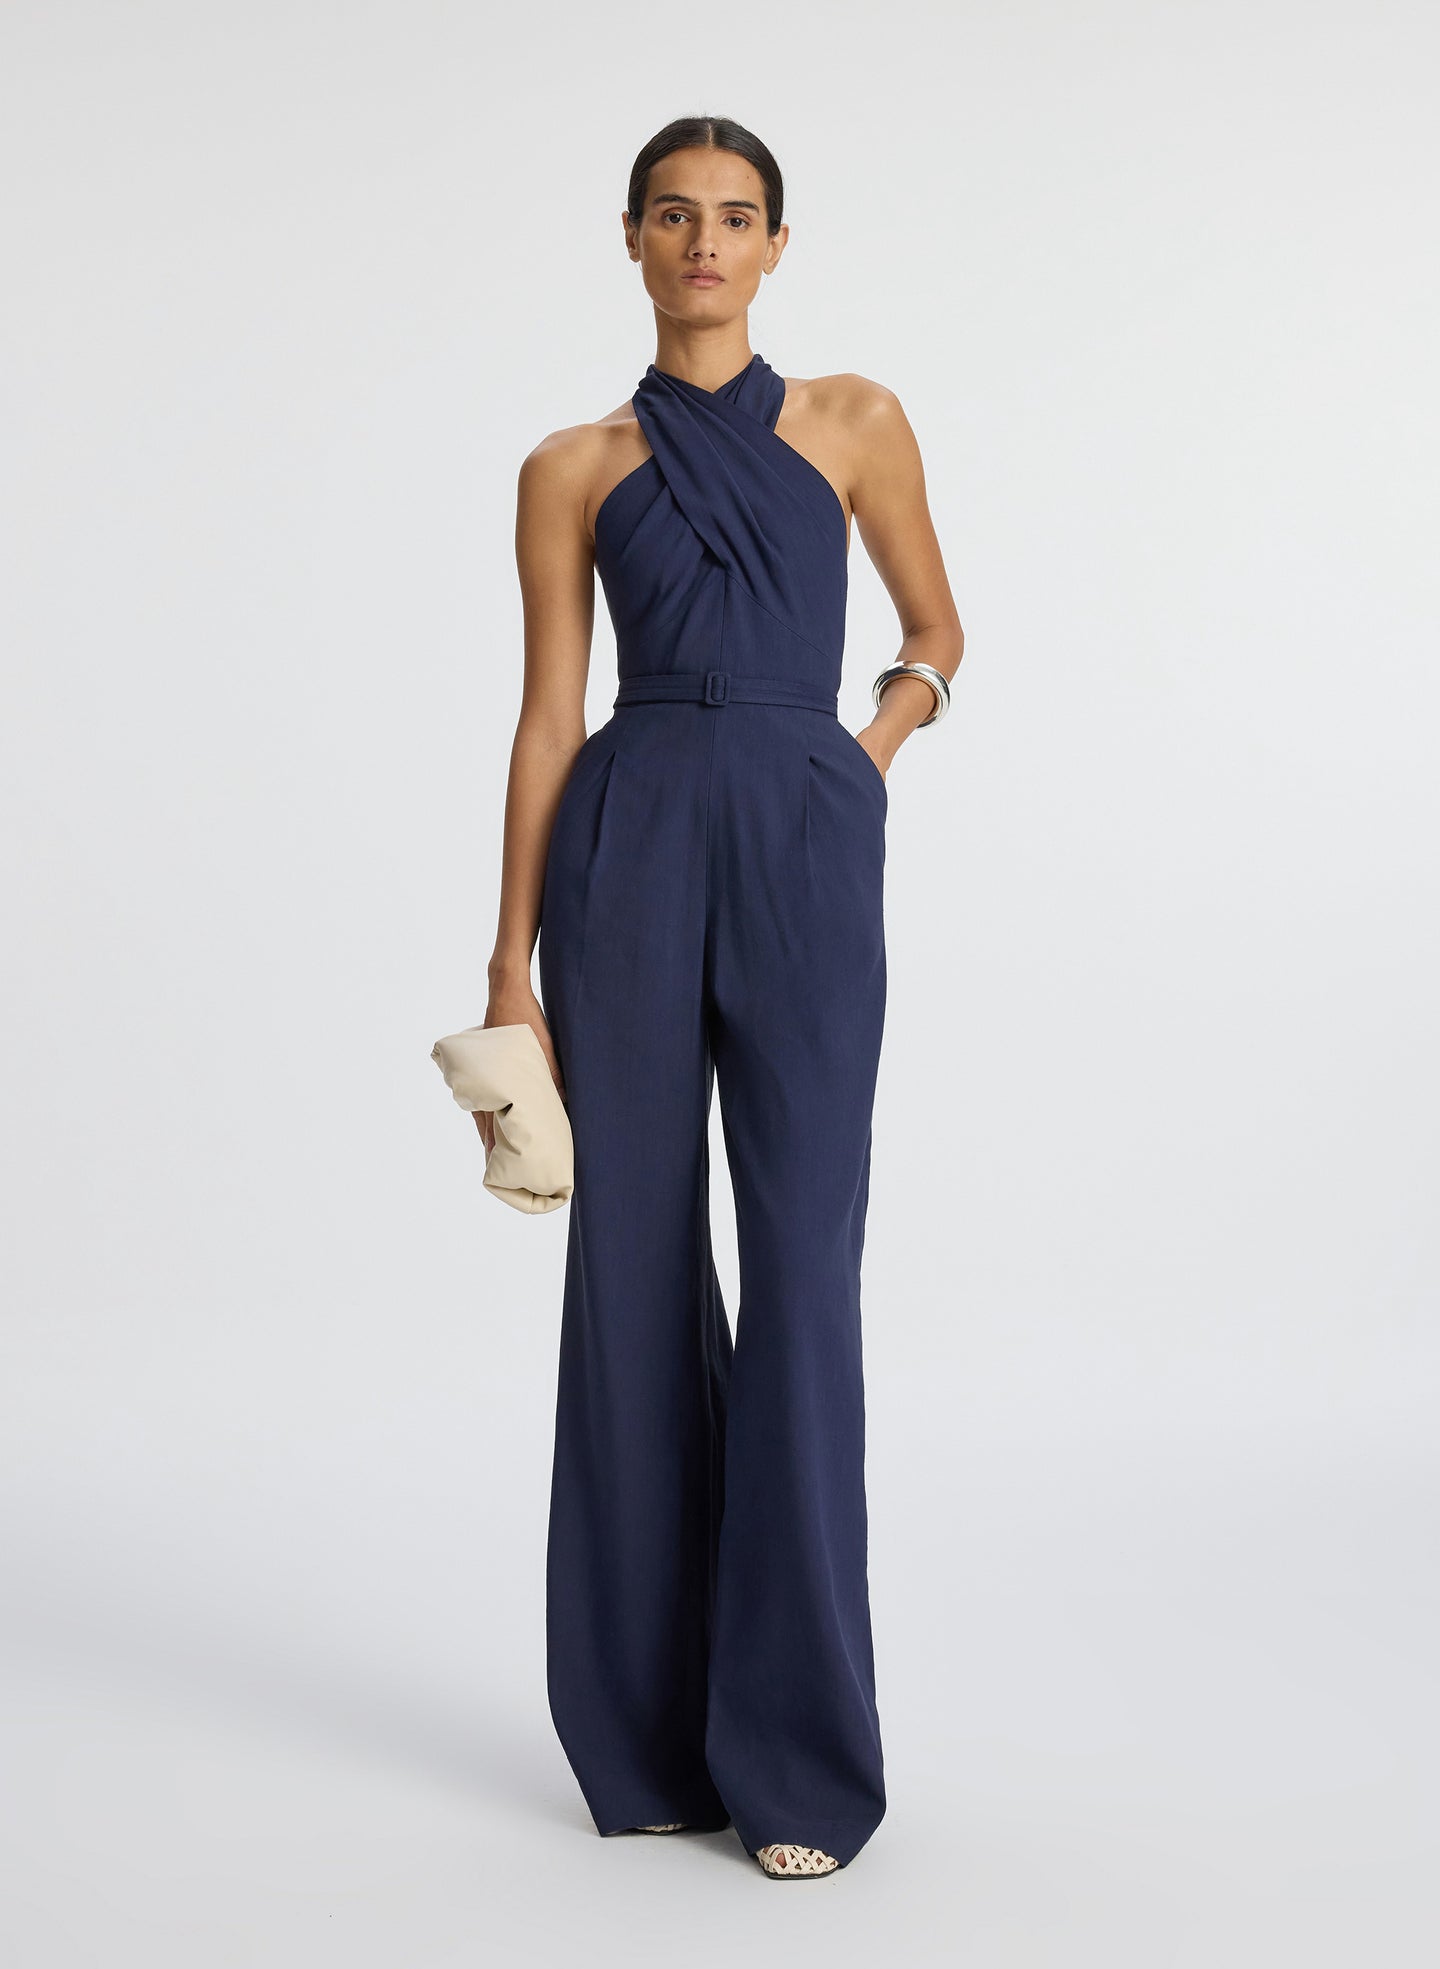 Front view of woman wearing navy blue sleeveless jumpsuit